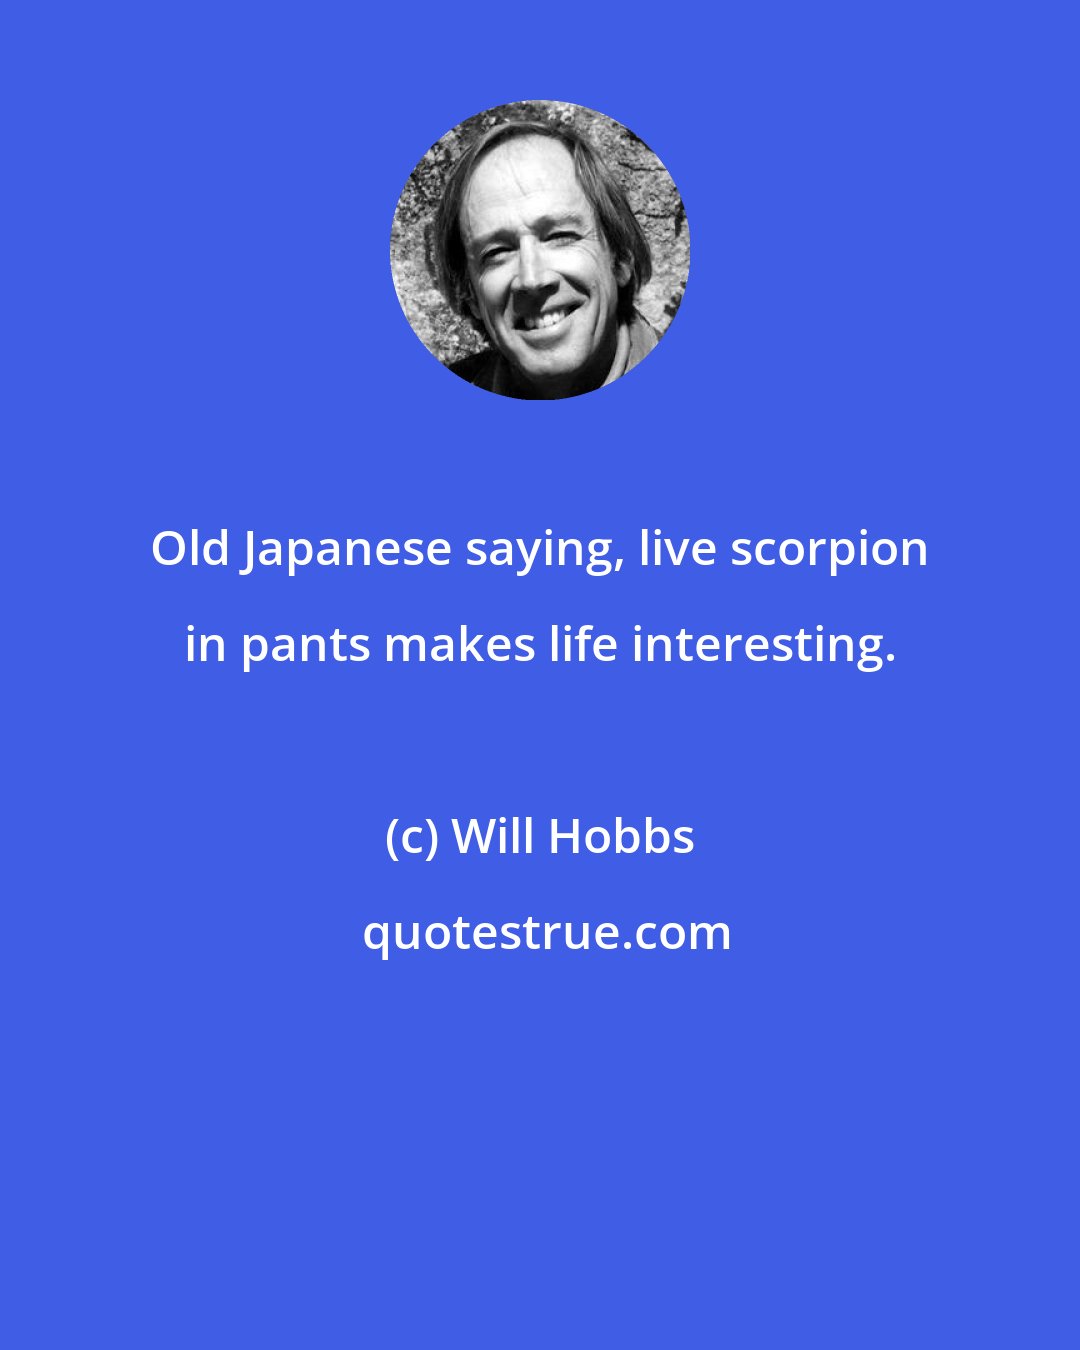 Will Hobbs: Old Japanese saying, live scorpion in pants makes life interesting.